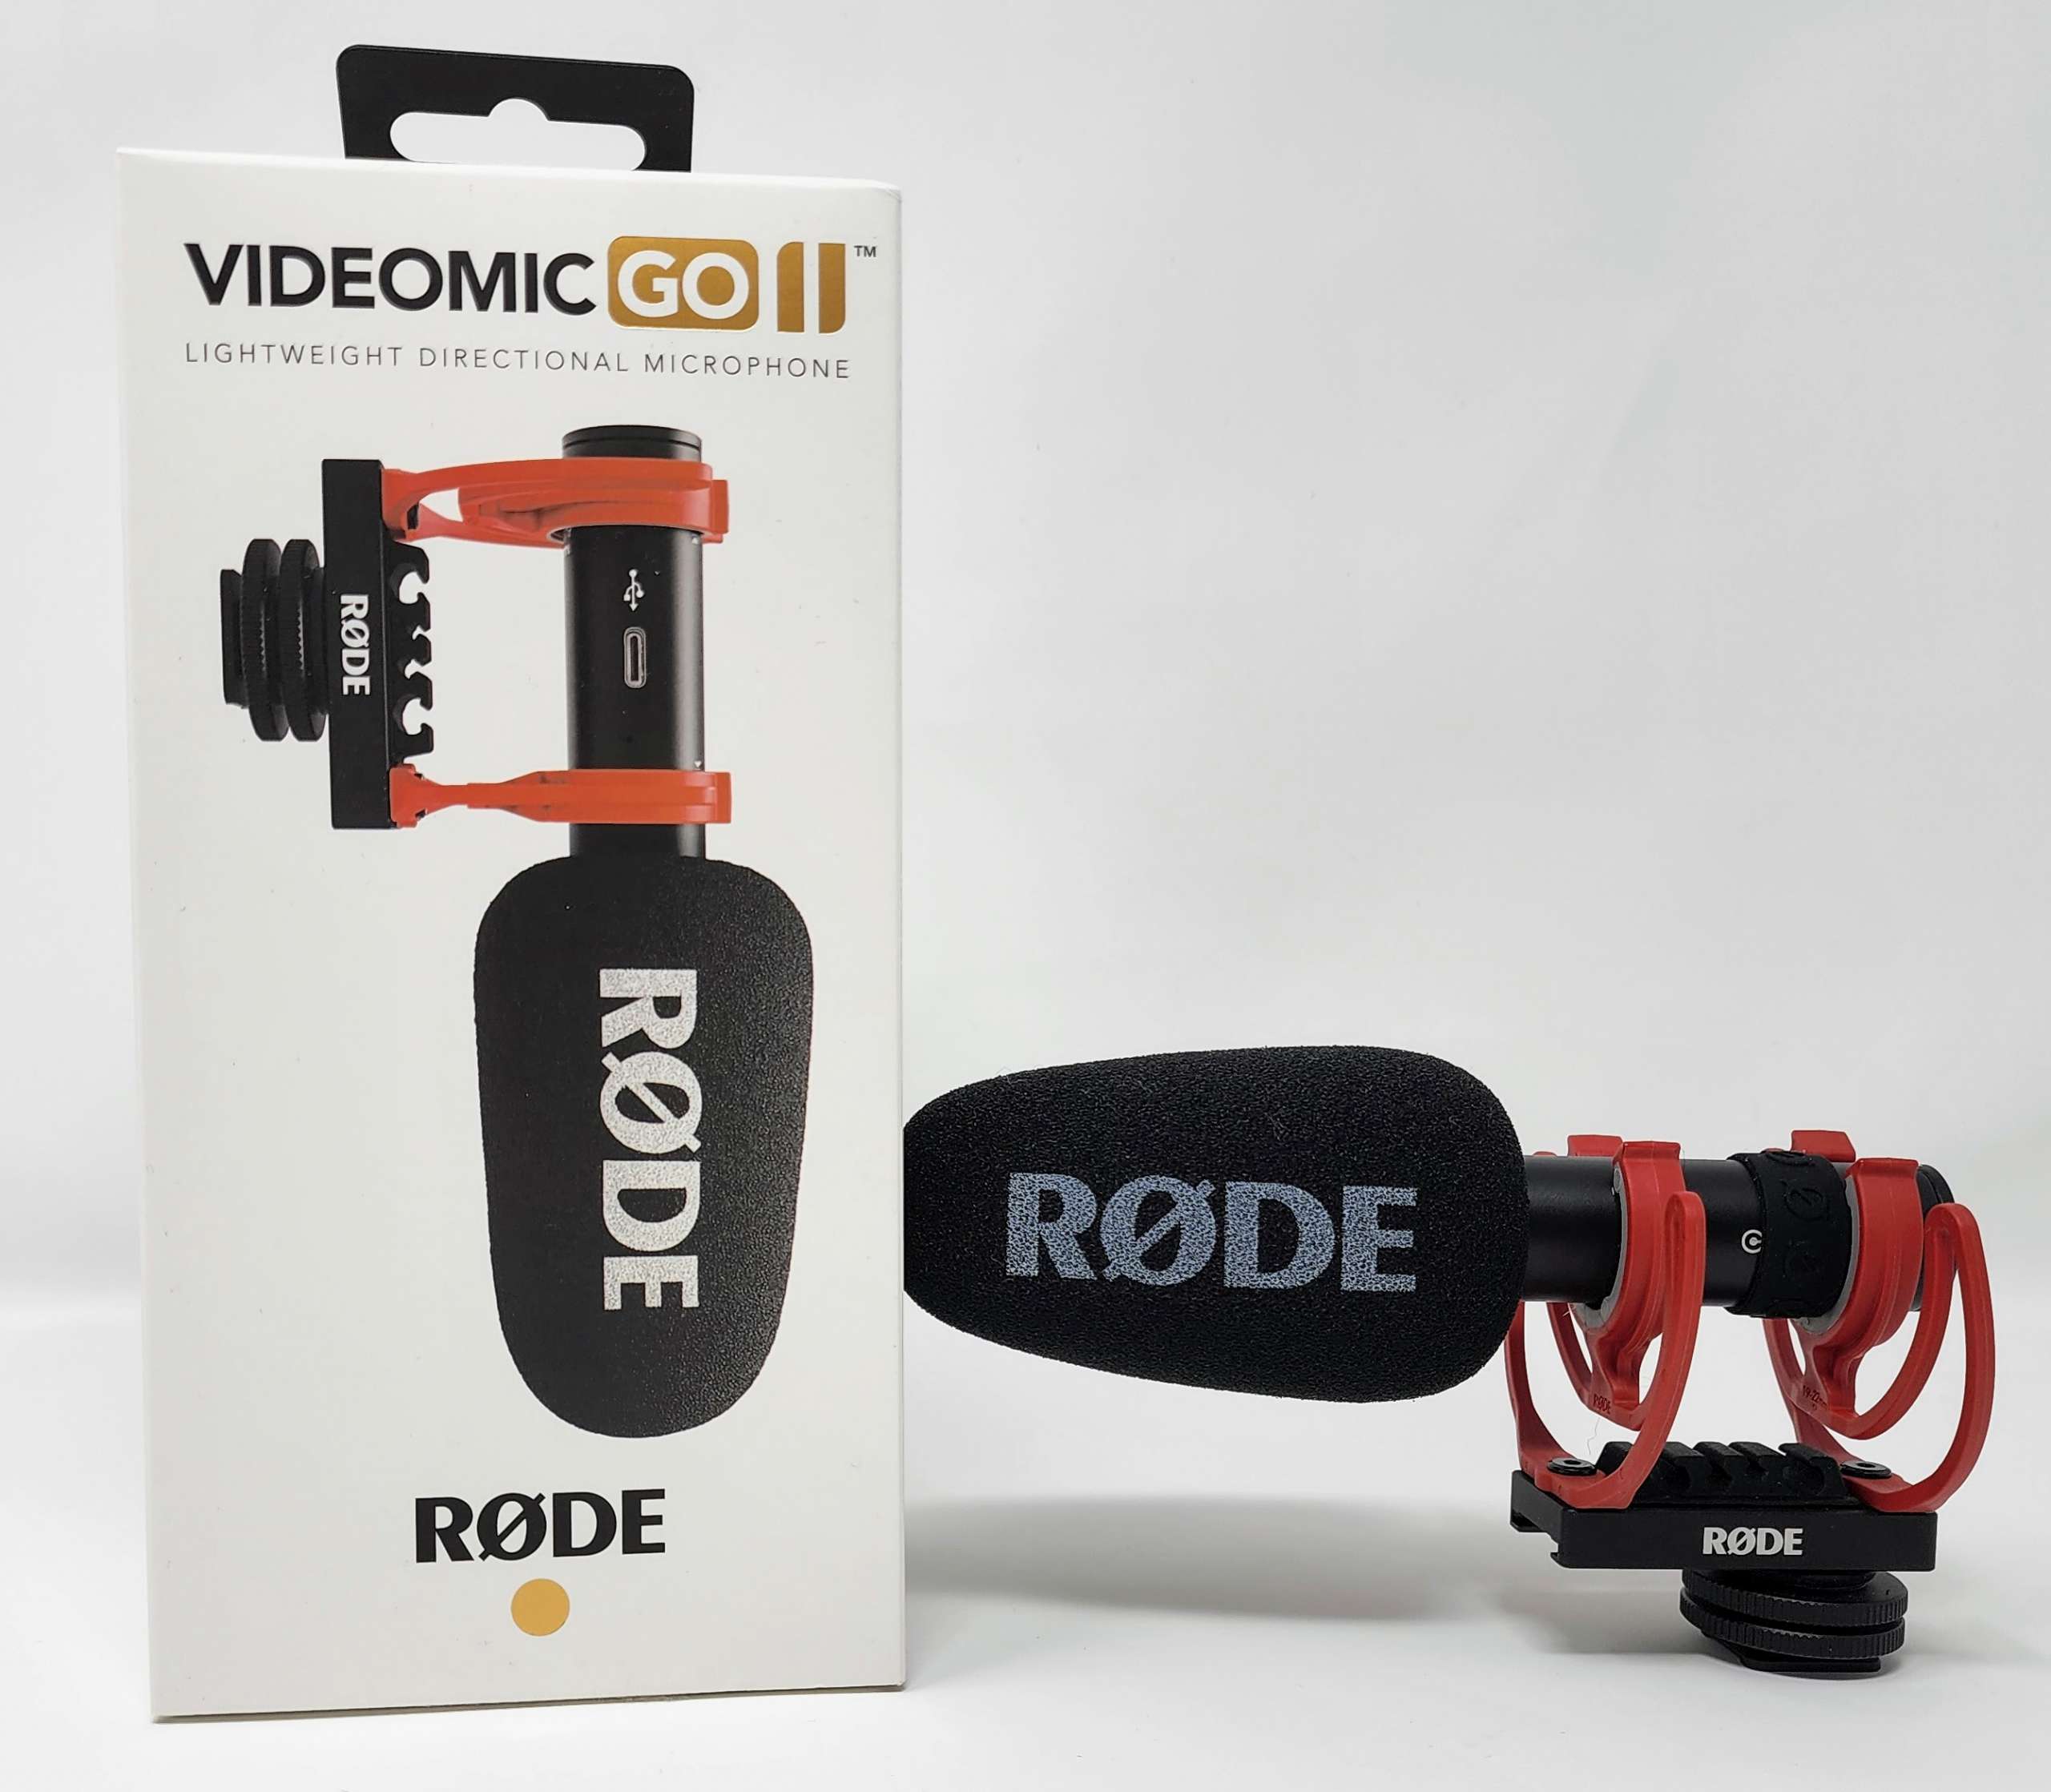 RØDE VideoMic GO II microphone review - Run and gun refined - The